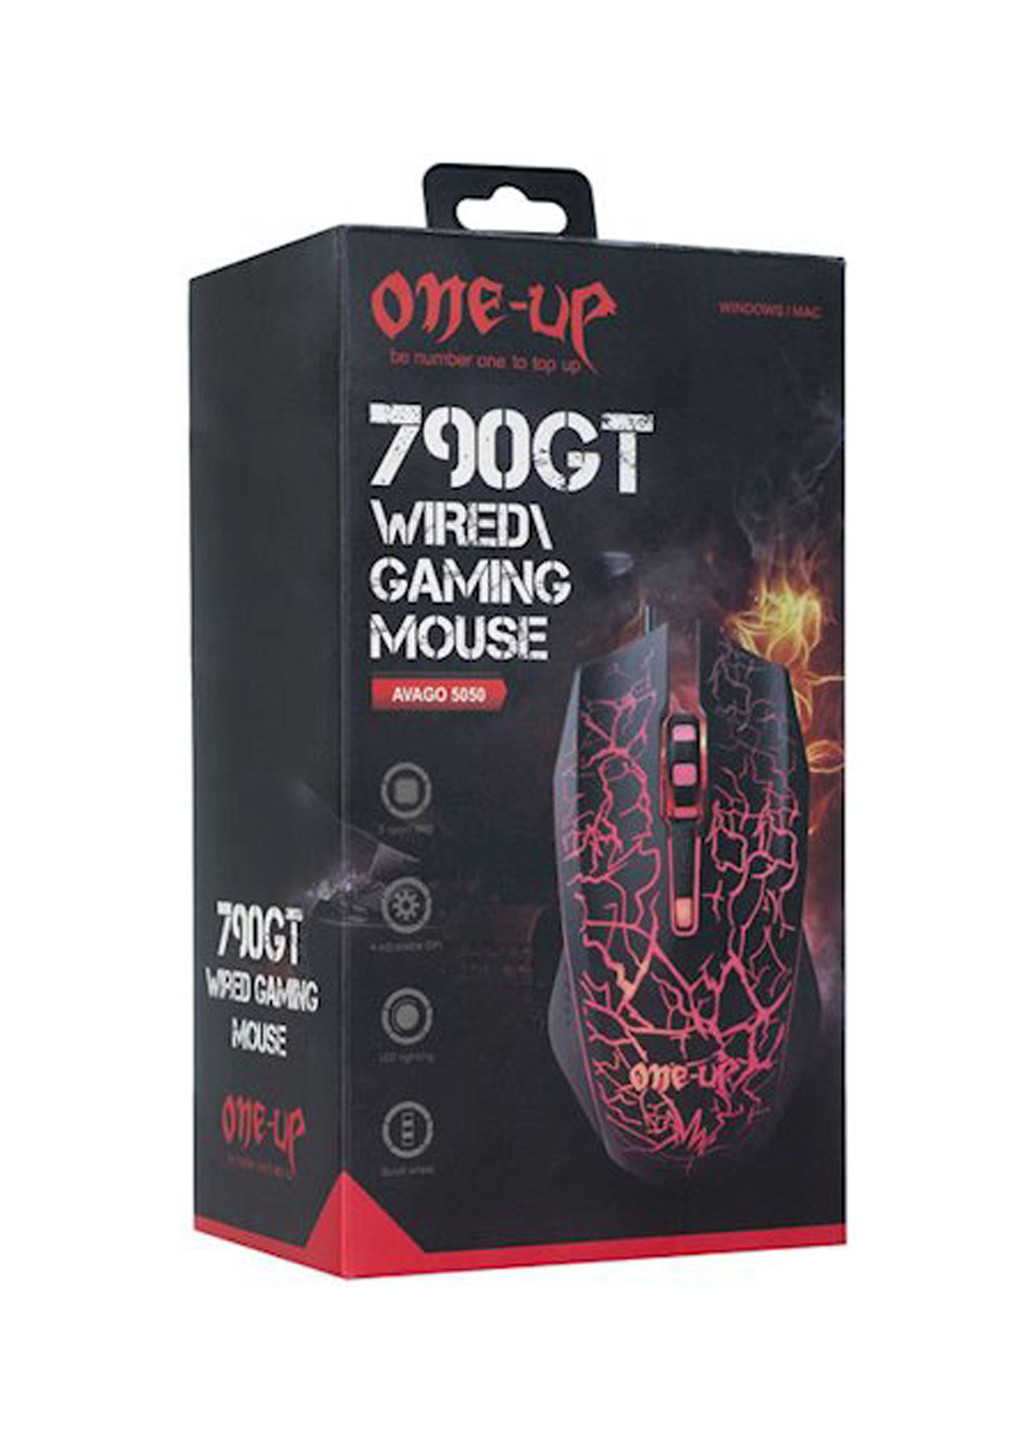 Мышь Gaming mouse ONE-UP 790gt (135036792)